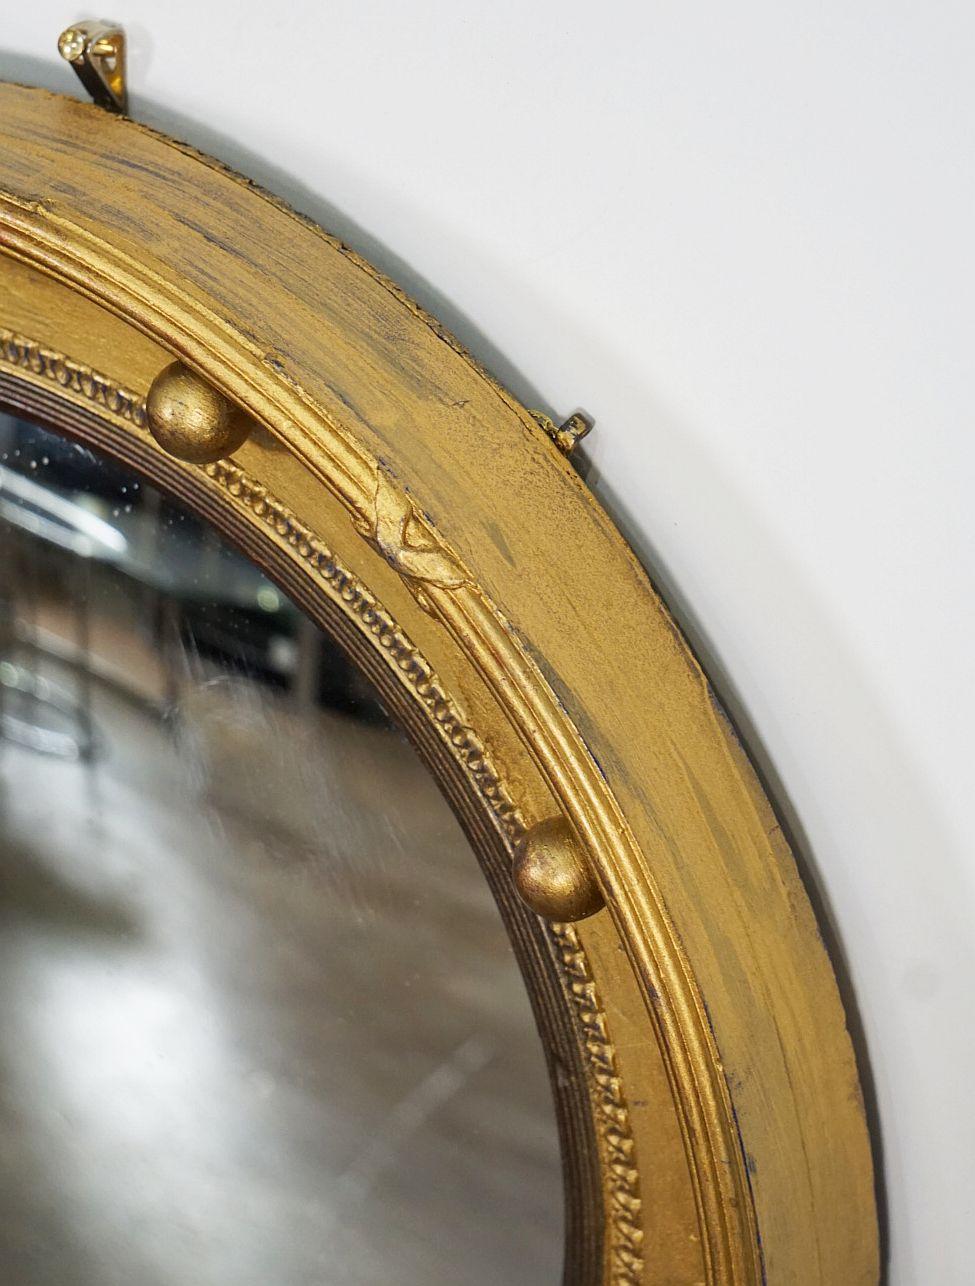 English Round Gilt Framed Convex Mirror in the Regency Style (Diameter 13 3/4) For Sale 7